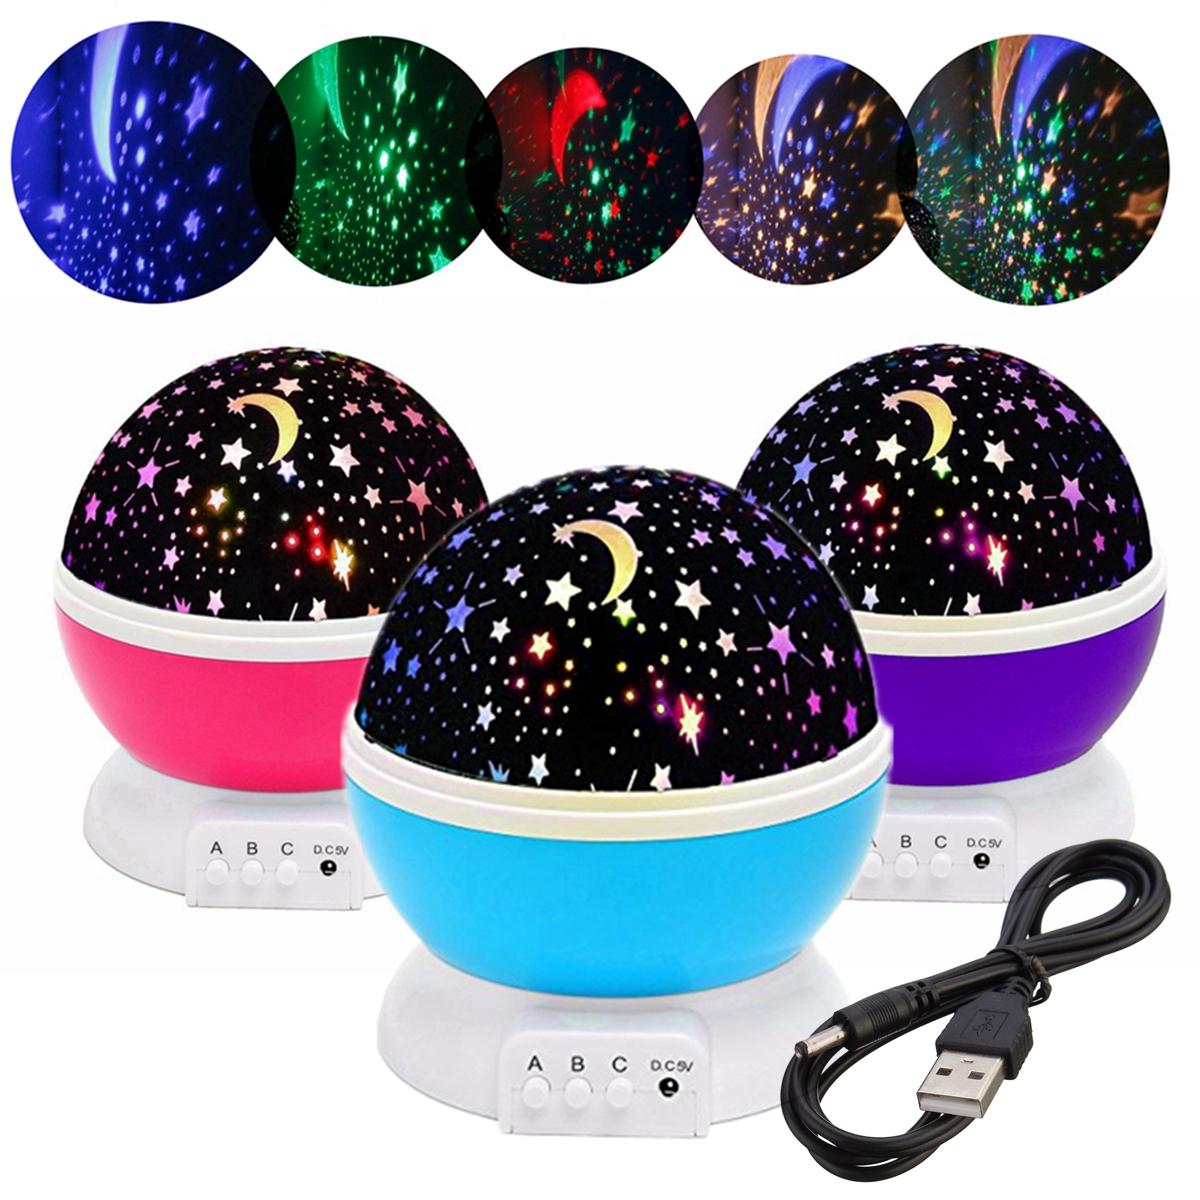 SOLMORE Star Lamp LED Bead 360 Degree Romantic Room Rotating Cosmos Star Projuctor With USB Cable